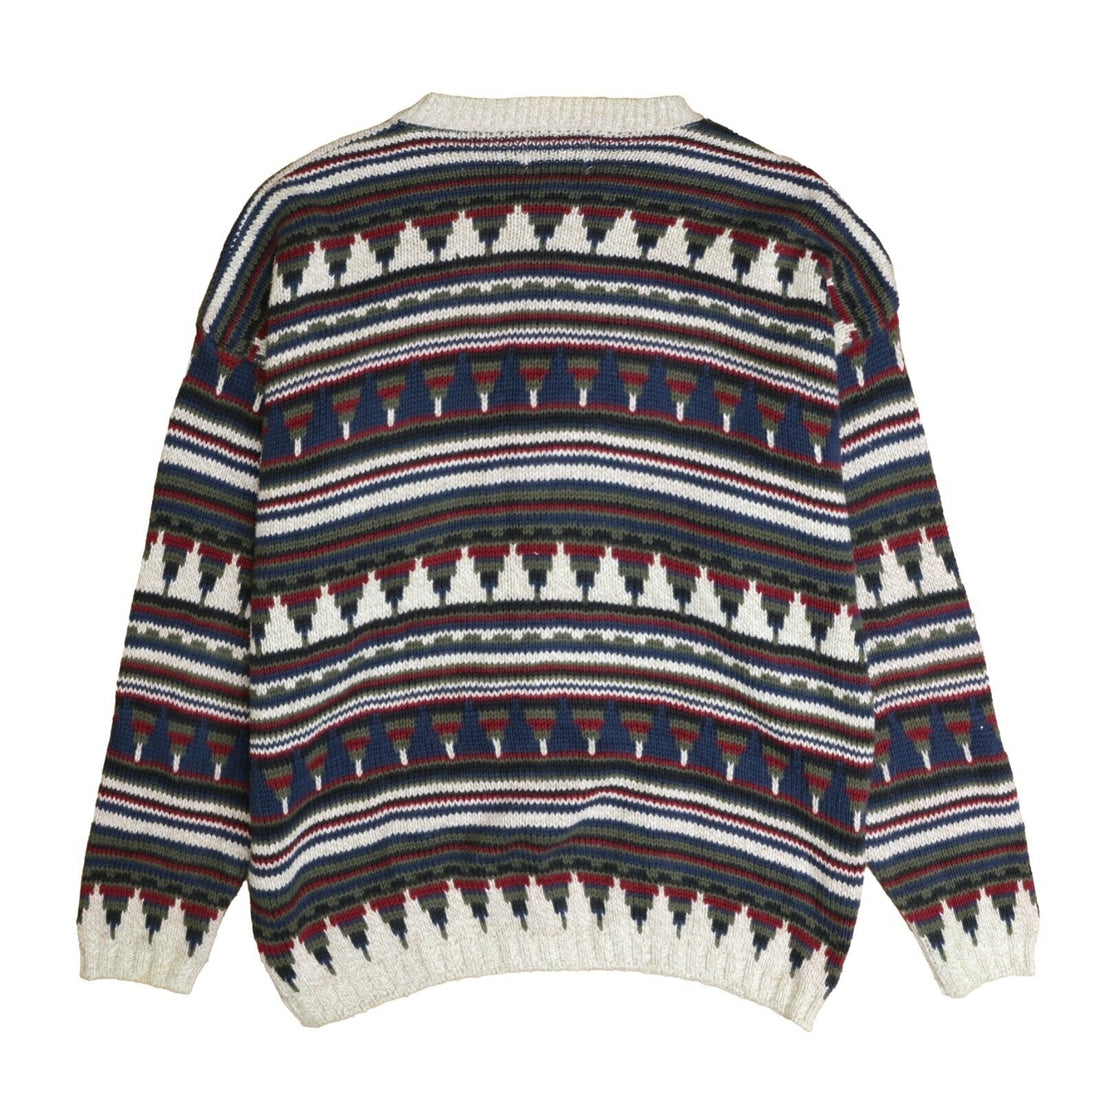 Woolrich Abstract Cardigan Sweater Size Large